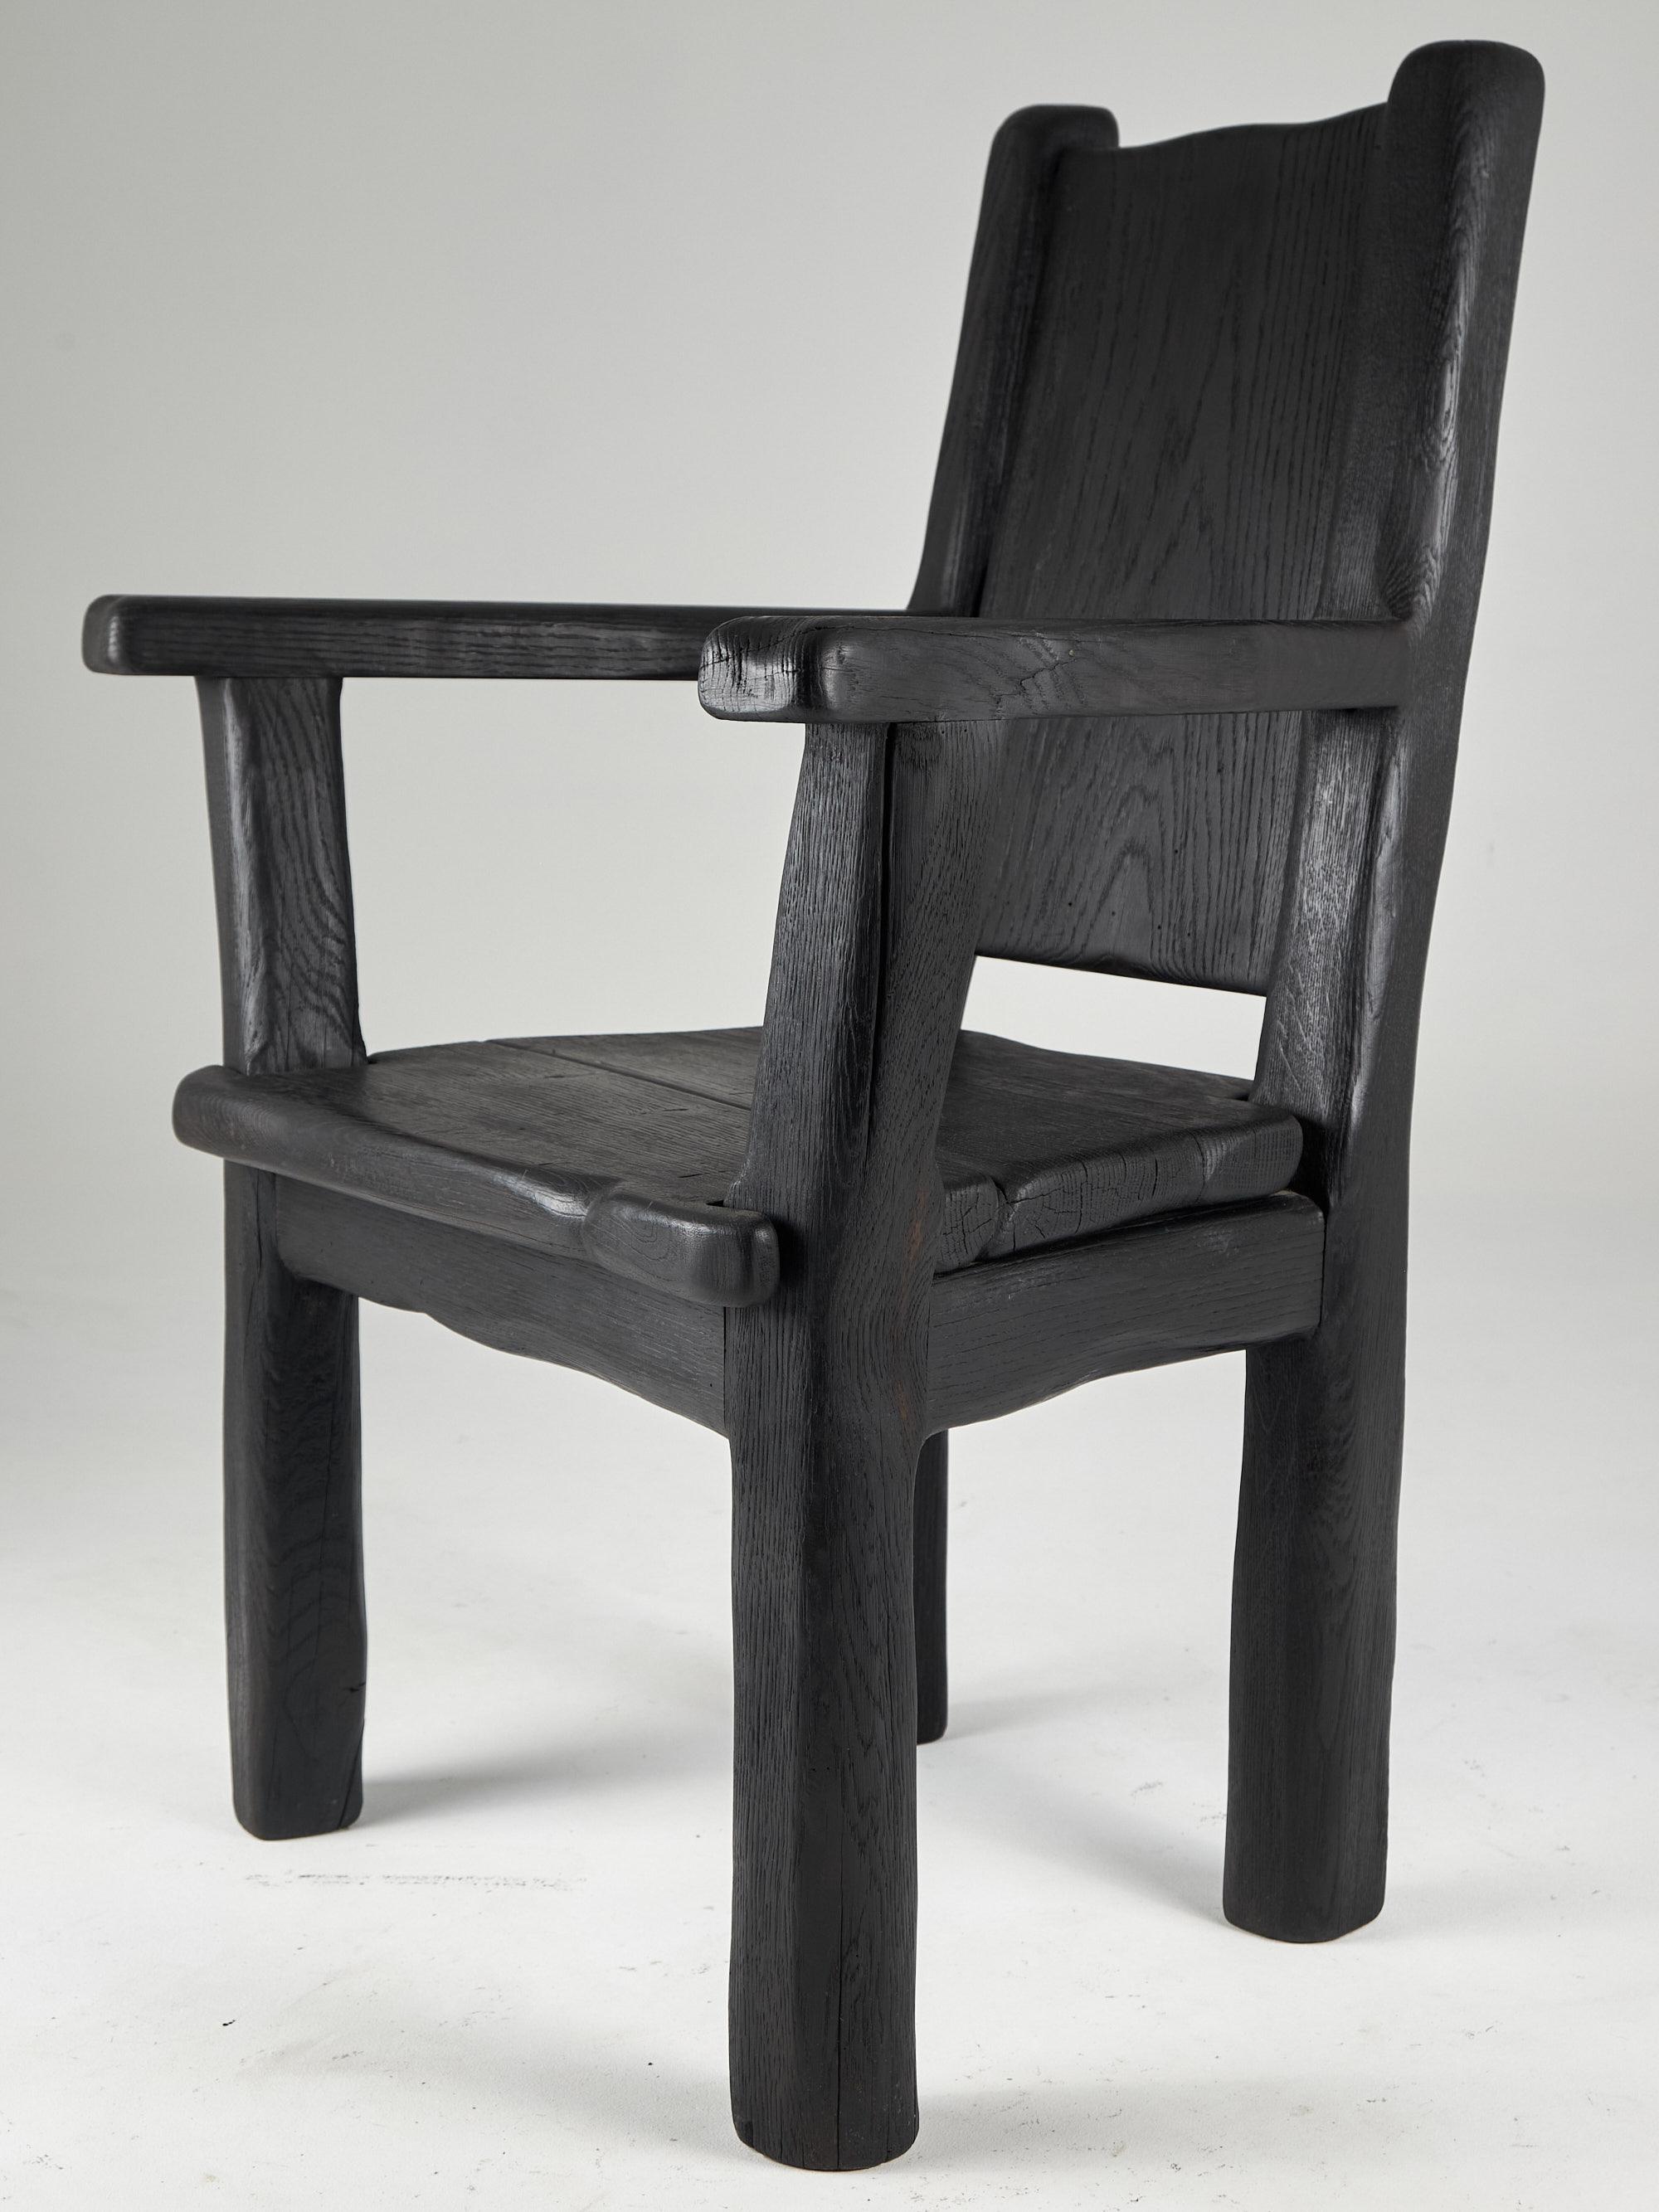 Hand-Crafted Massive Oak Armchair, Rustic, Burnt Black, For Generations to Last For Sale